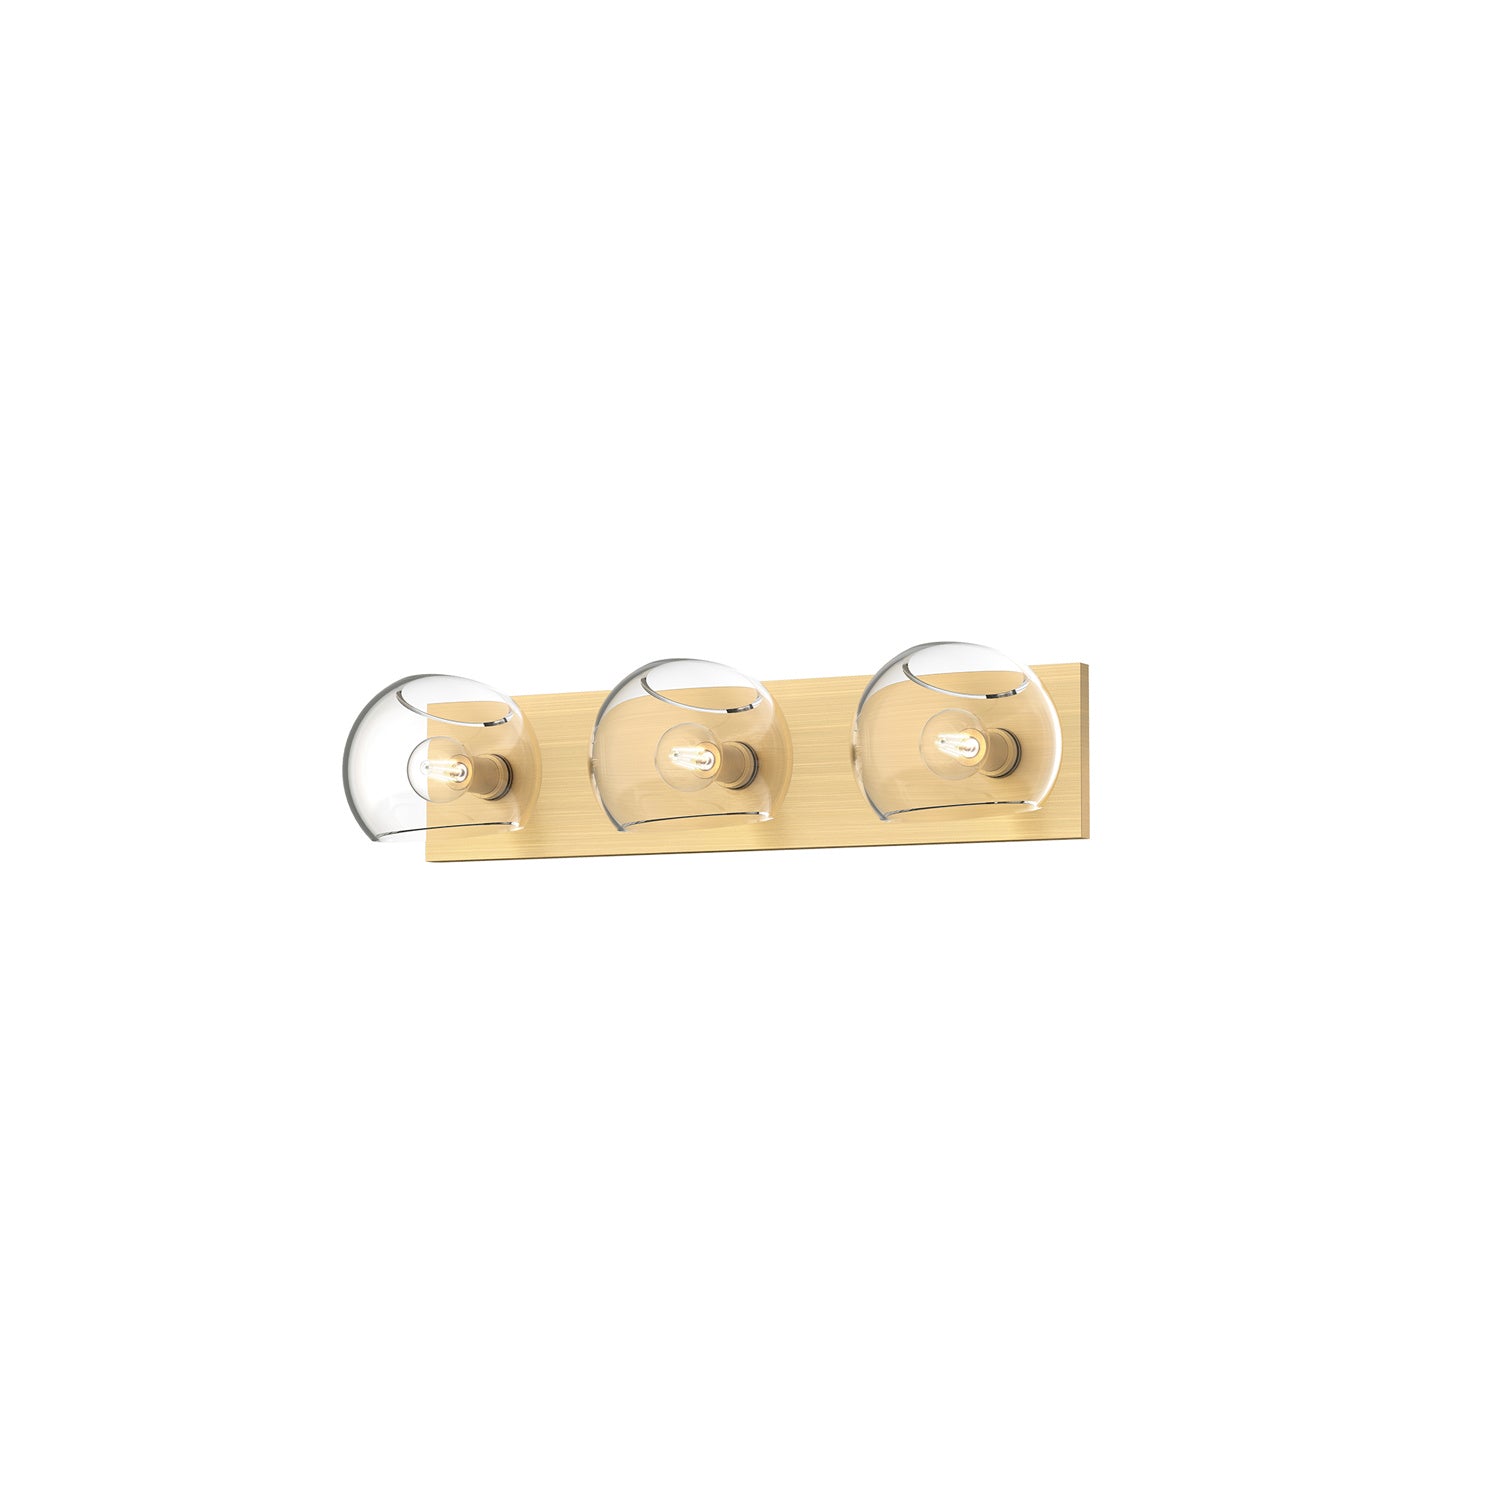 Alora - VL548322BGCL - Three Light Bathroom Fixtures - Willow - Brushed Gold/Clear Glass